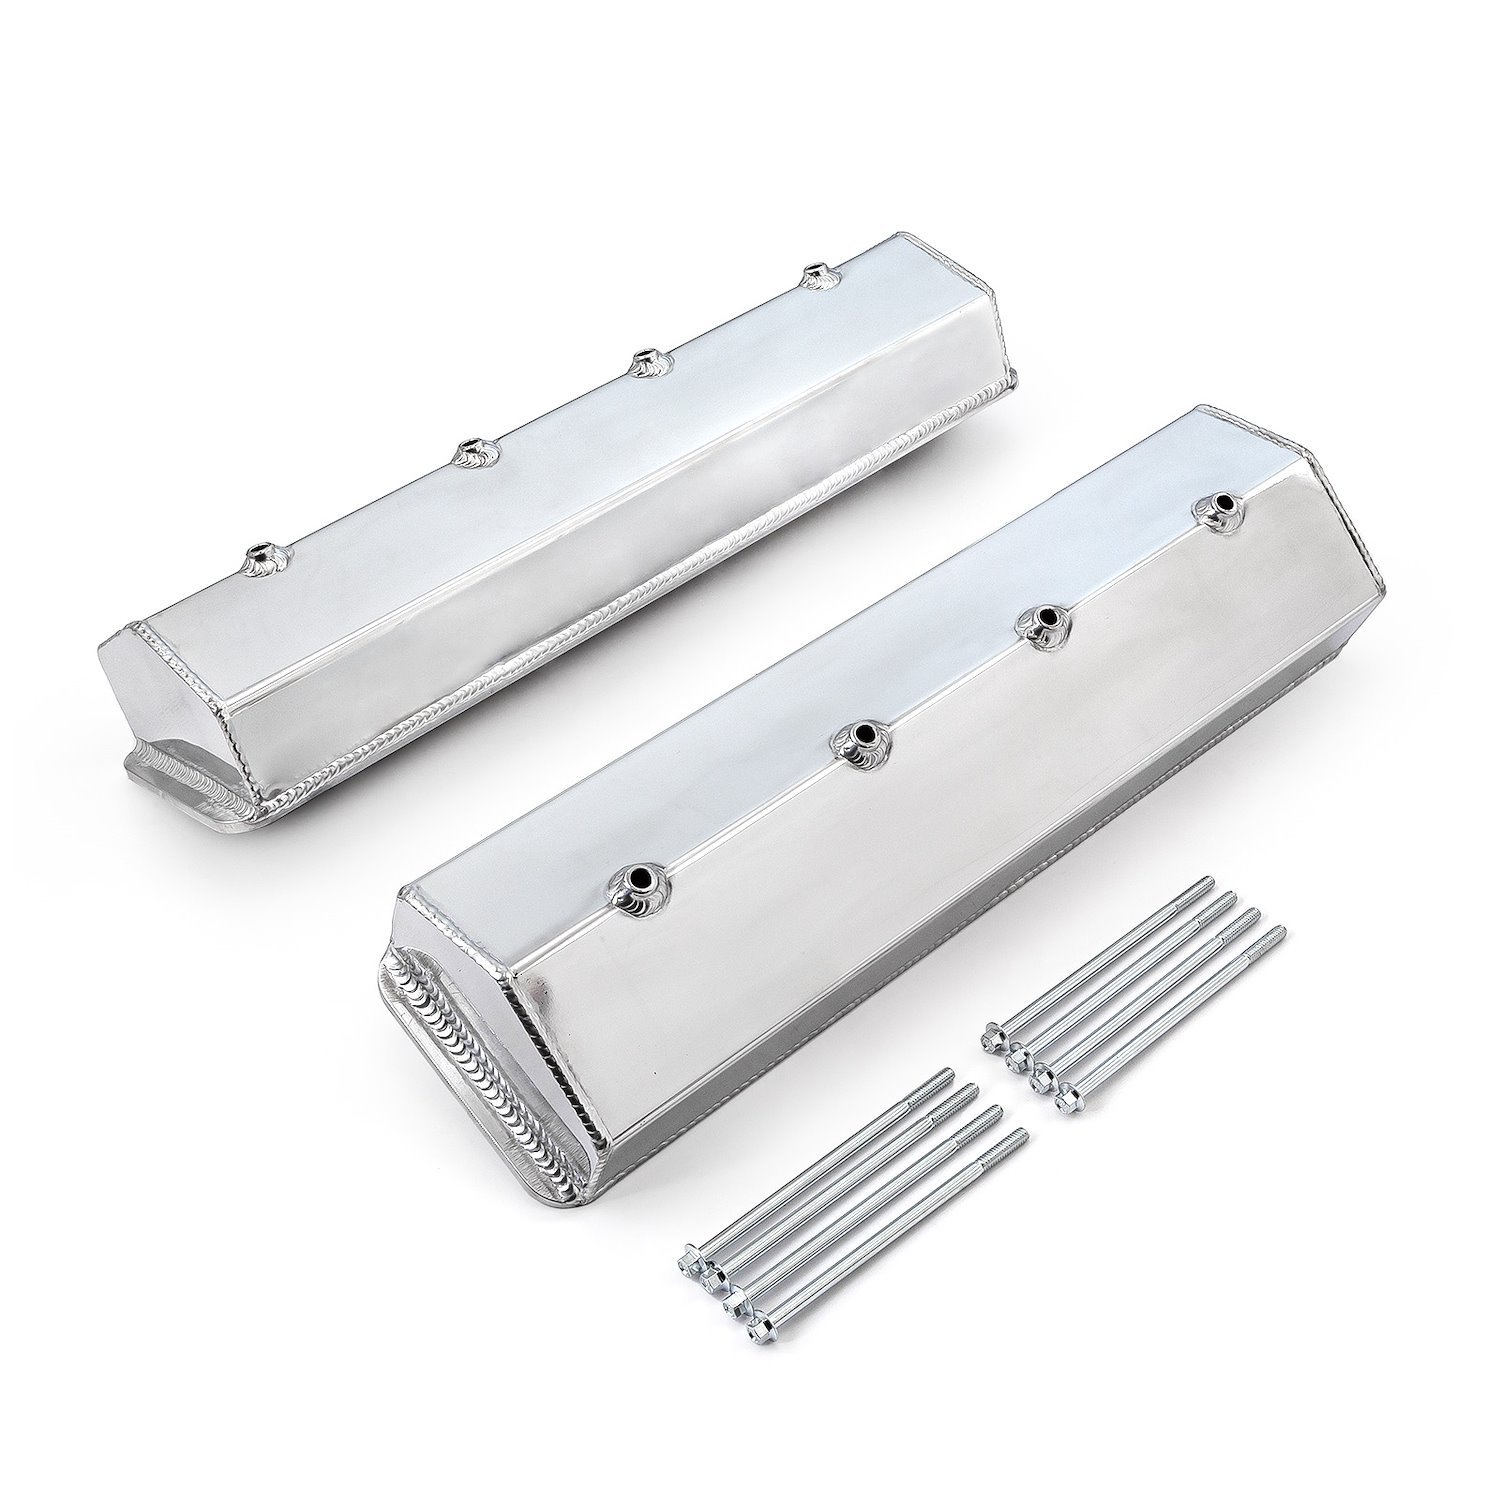 PCE314.1137.01 Chevy SBC 350 Vortec Center Bolt Fabricated Valve Covers Polished Tall w/o Hole